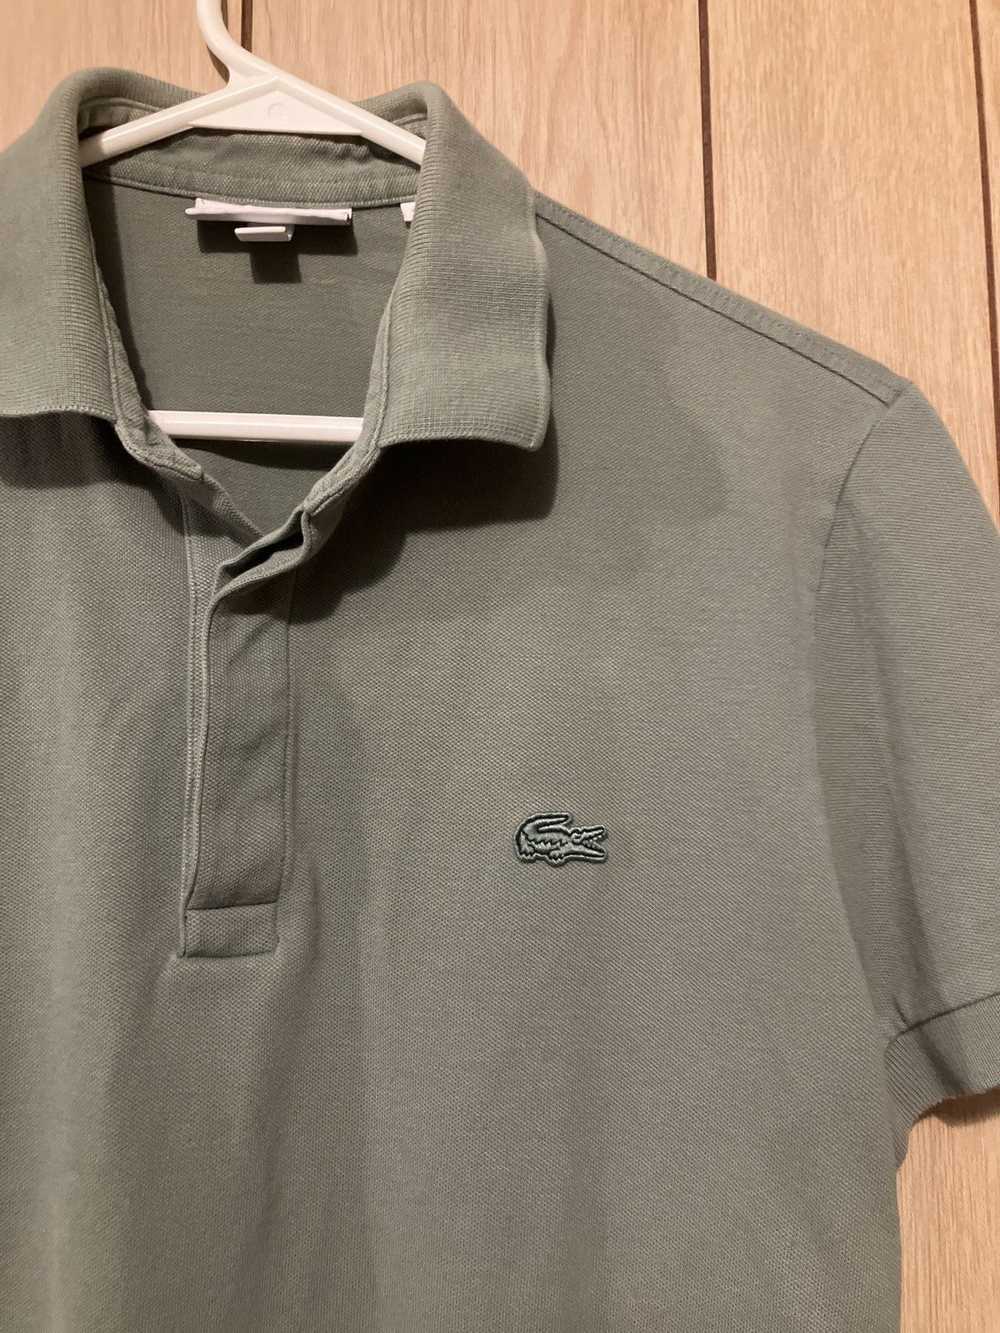 Lacoste Lacoste Polo Shirt. Small - image 5